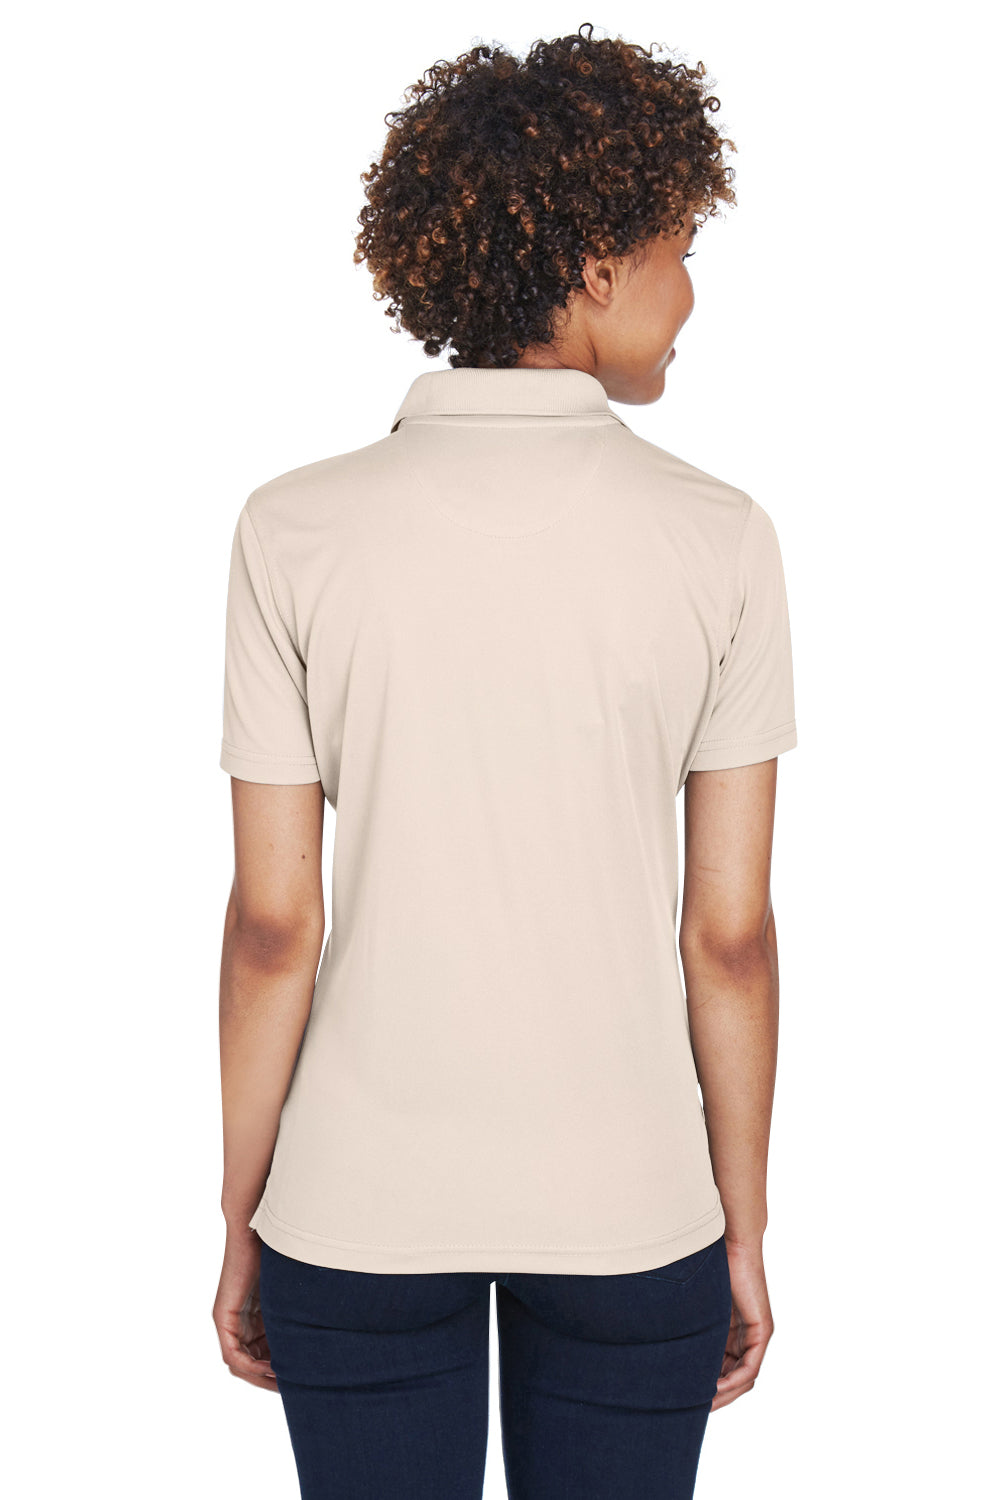 UltraClub 8210L Womens Cool & Dry Moisture Wicking Short Sleeve Polo Shirt Stone Brown Back